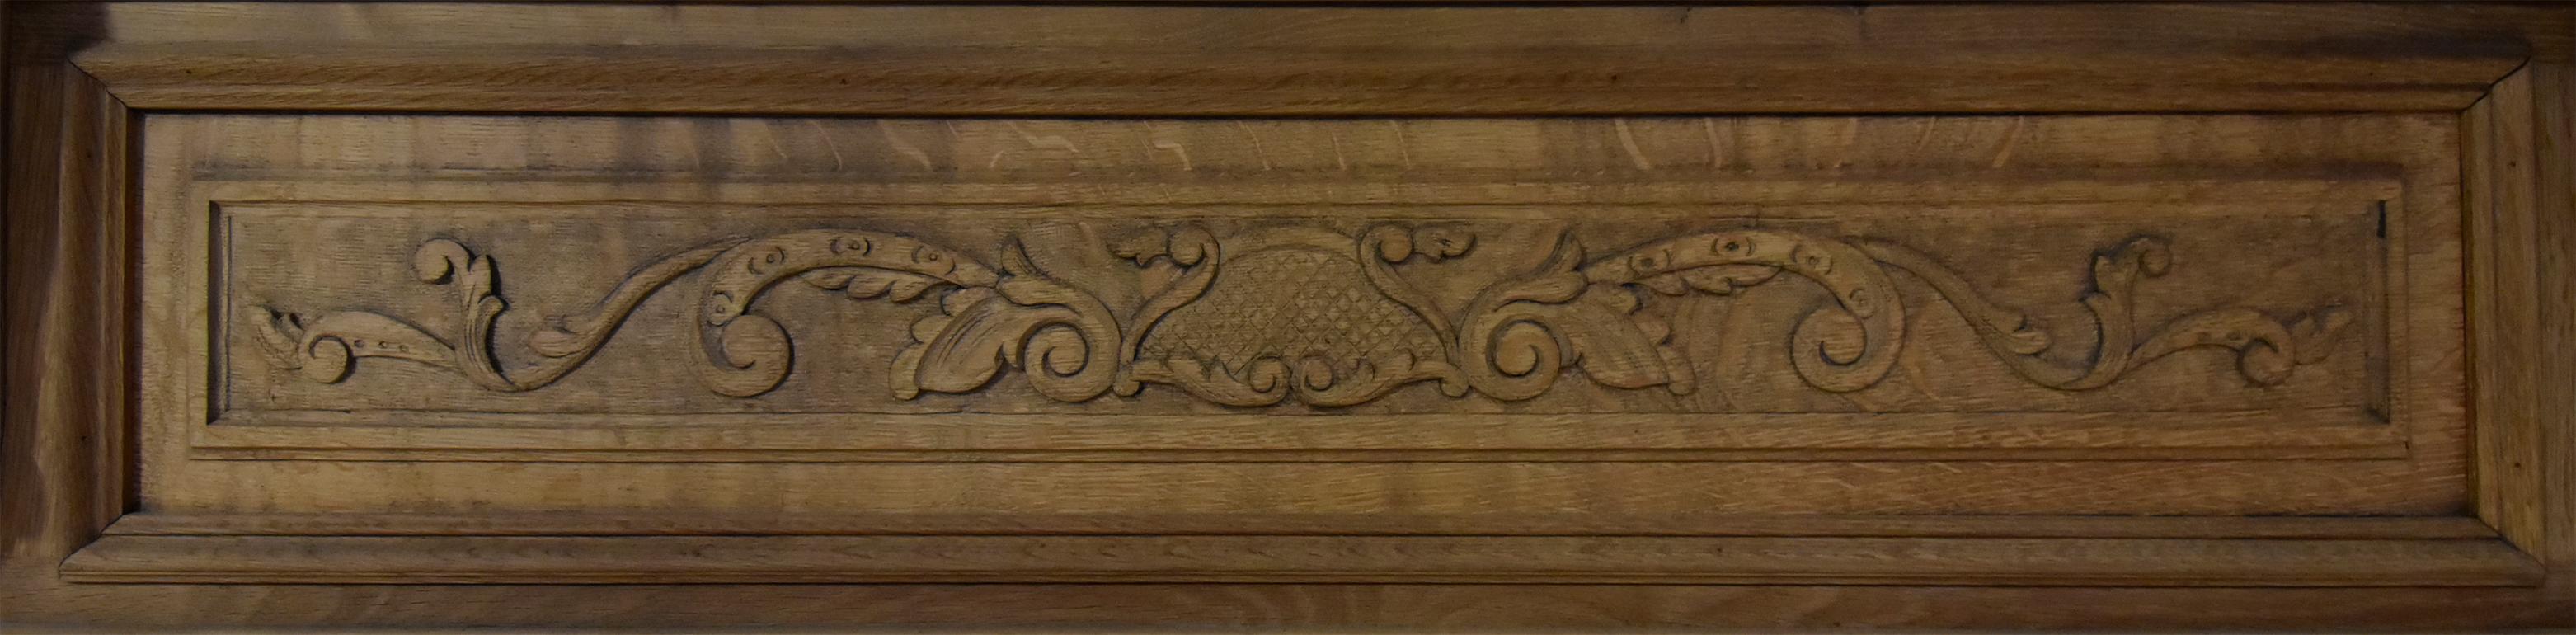 French Antique Wooden Fireplace Mantel, 19th Century